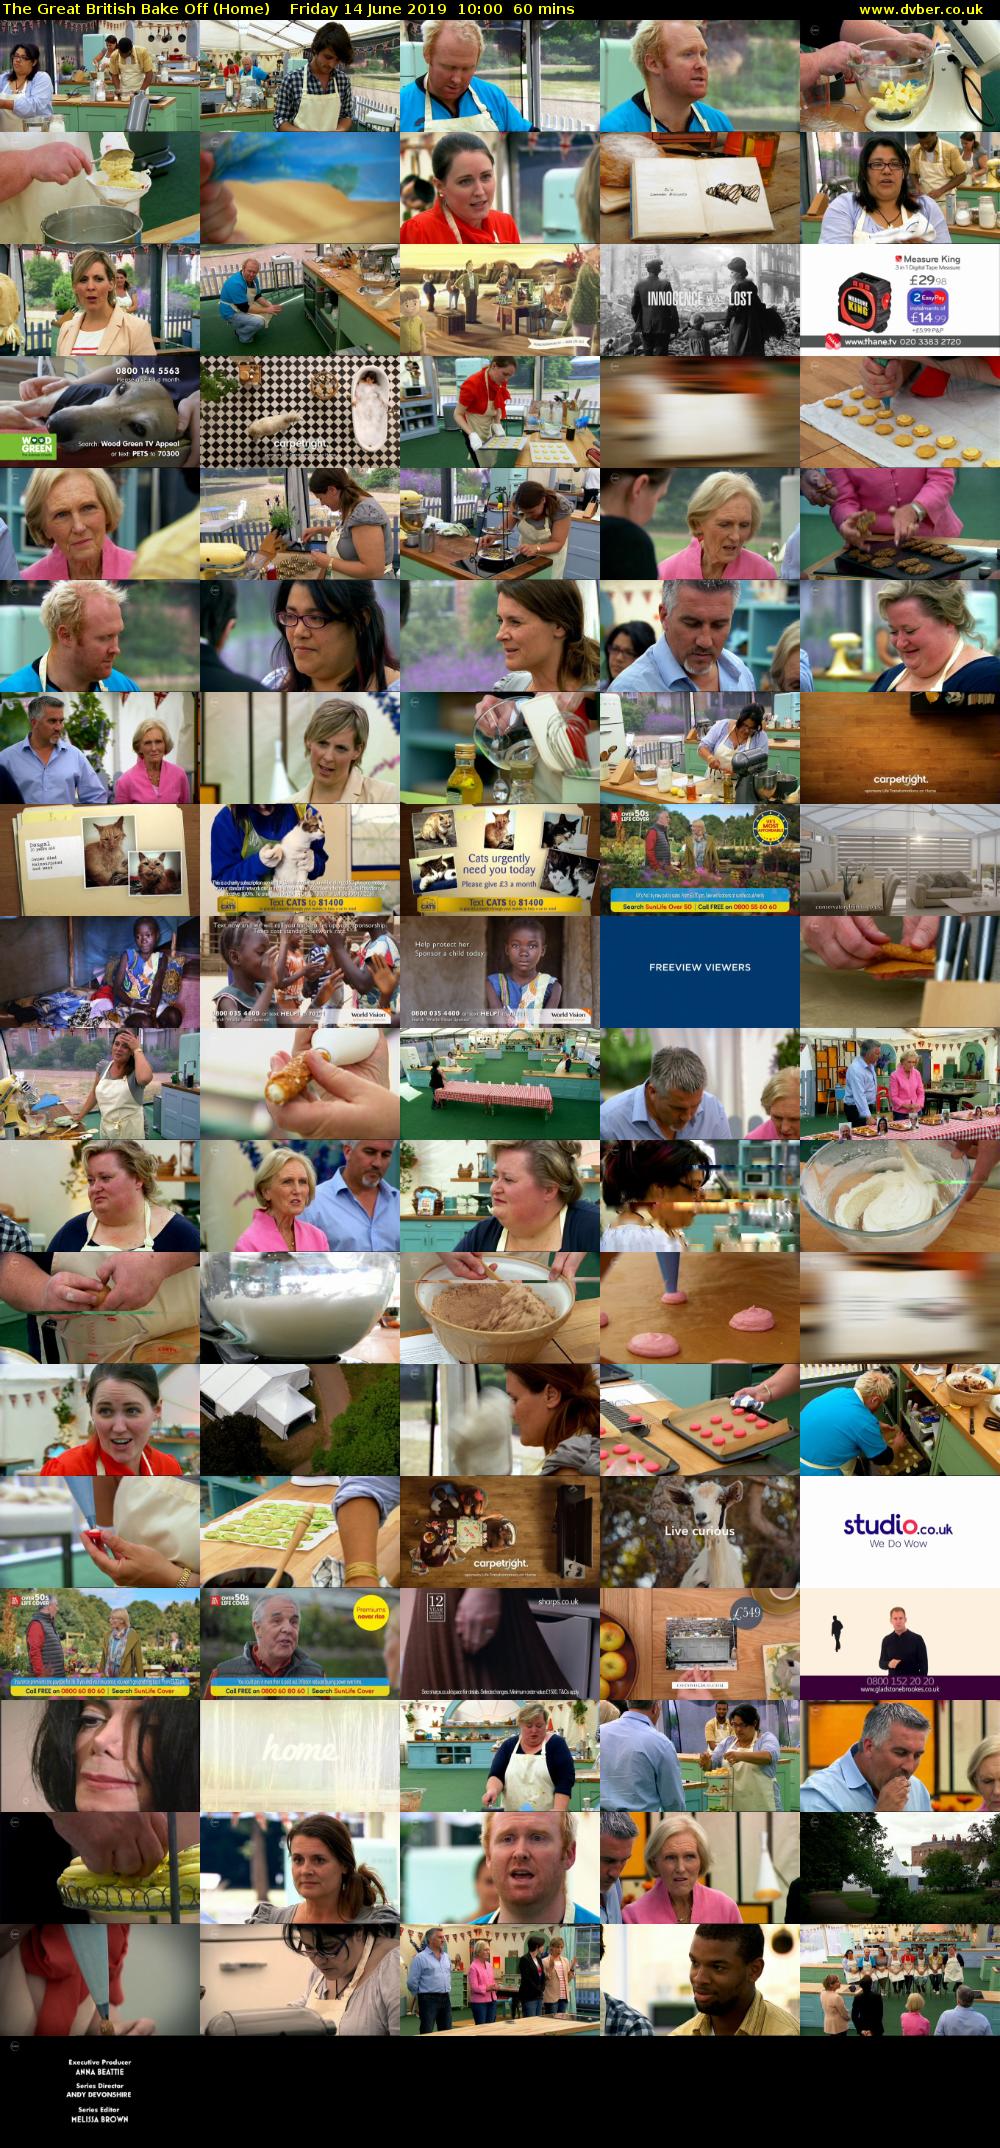 The Great British Bake Off (Home) Friday 14 June 2019 10:00 - 11:00